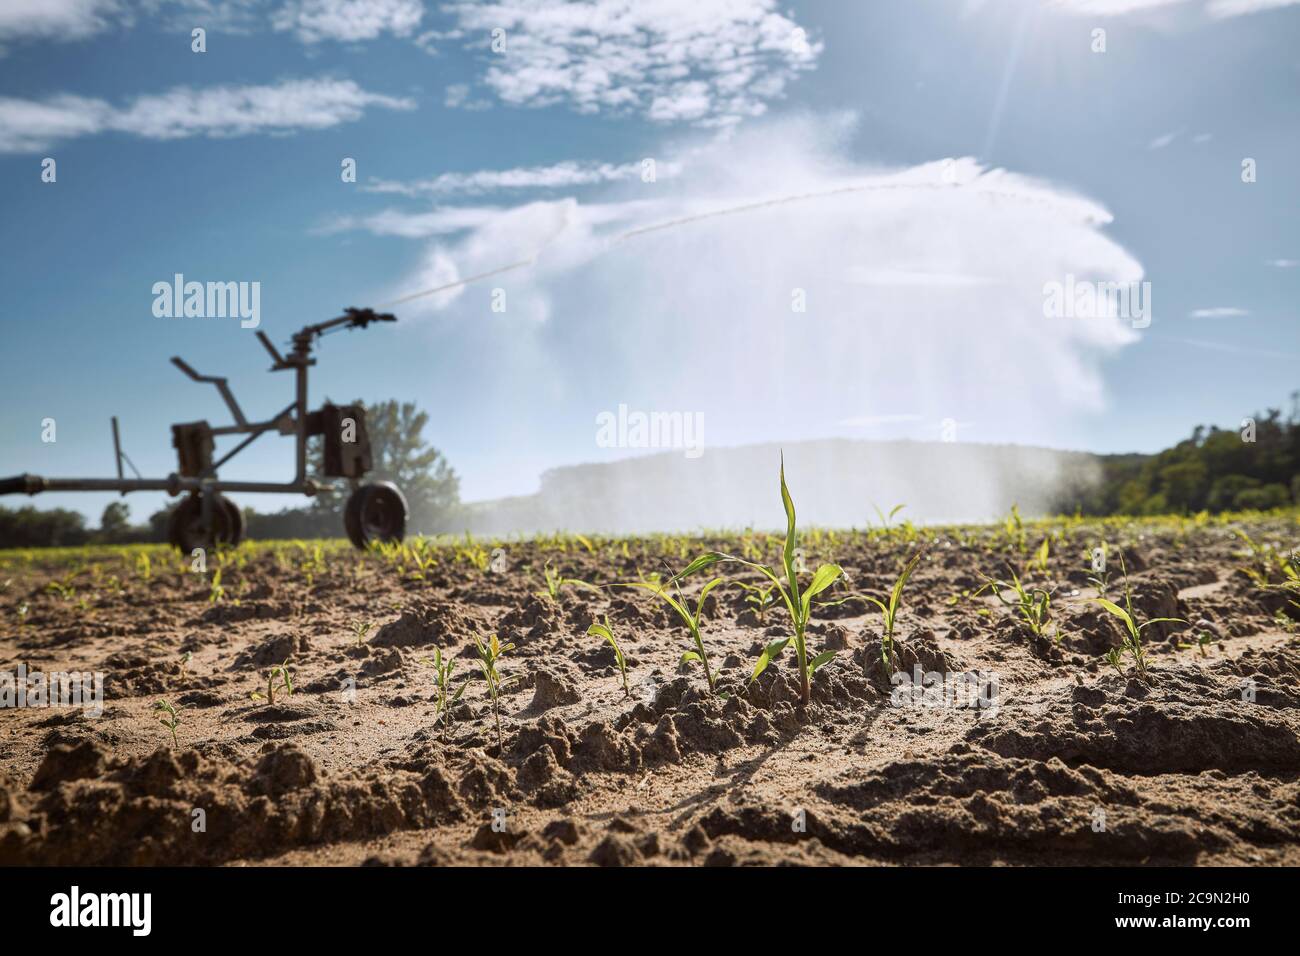 Agricultural irrigation machine spraying water on dry filed. Themes drought, environment and agriculture. Stock Photo